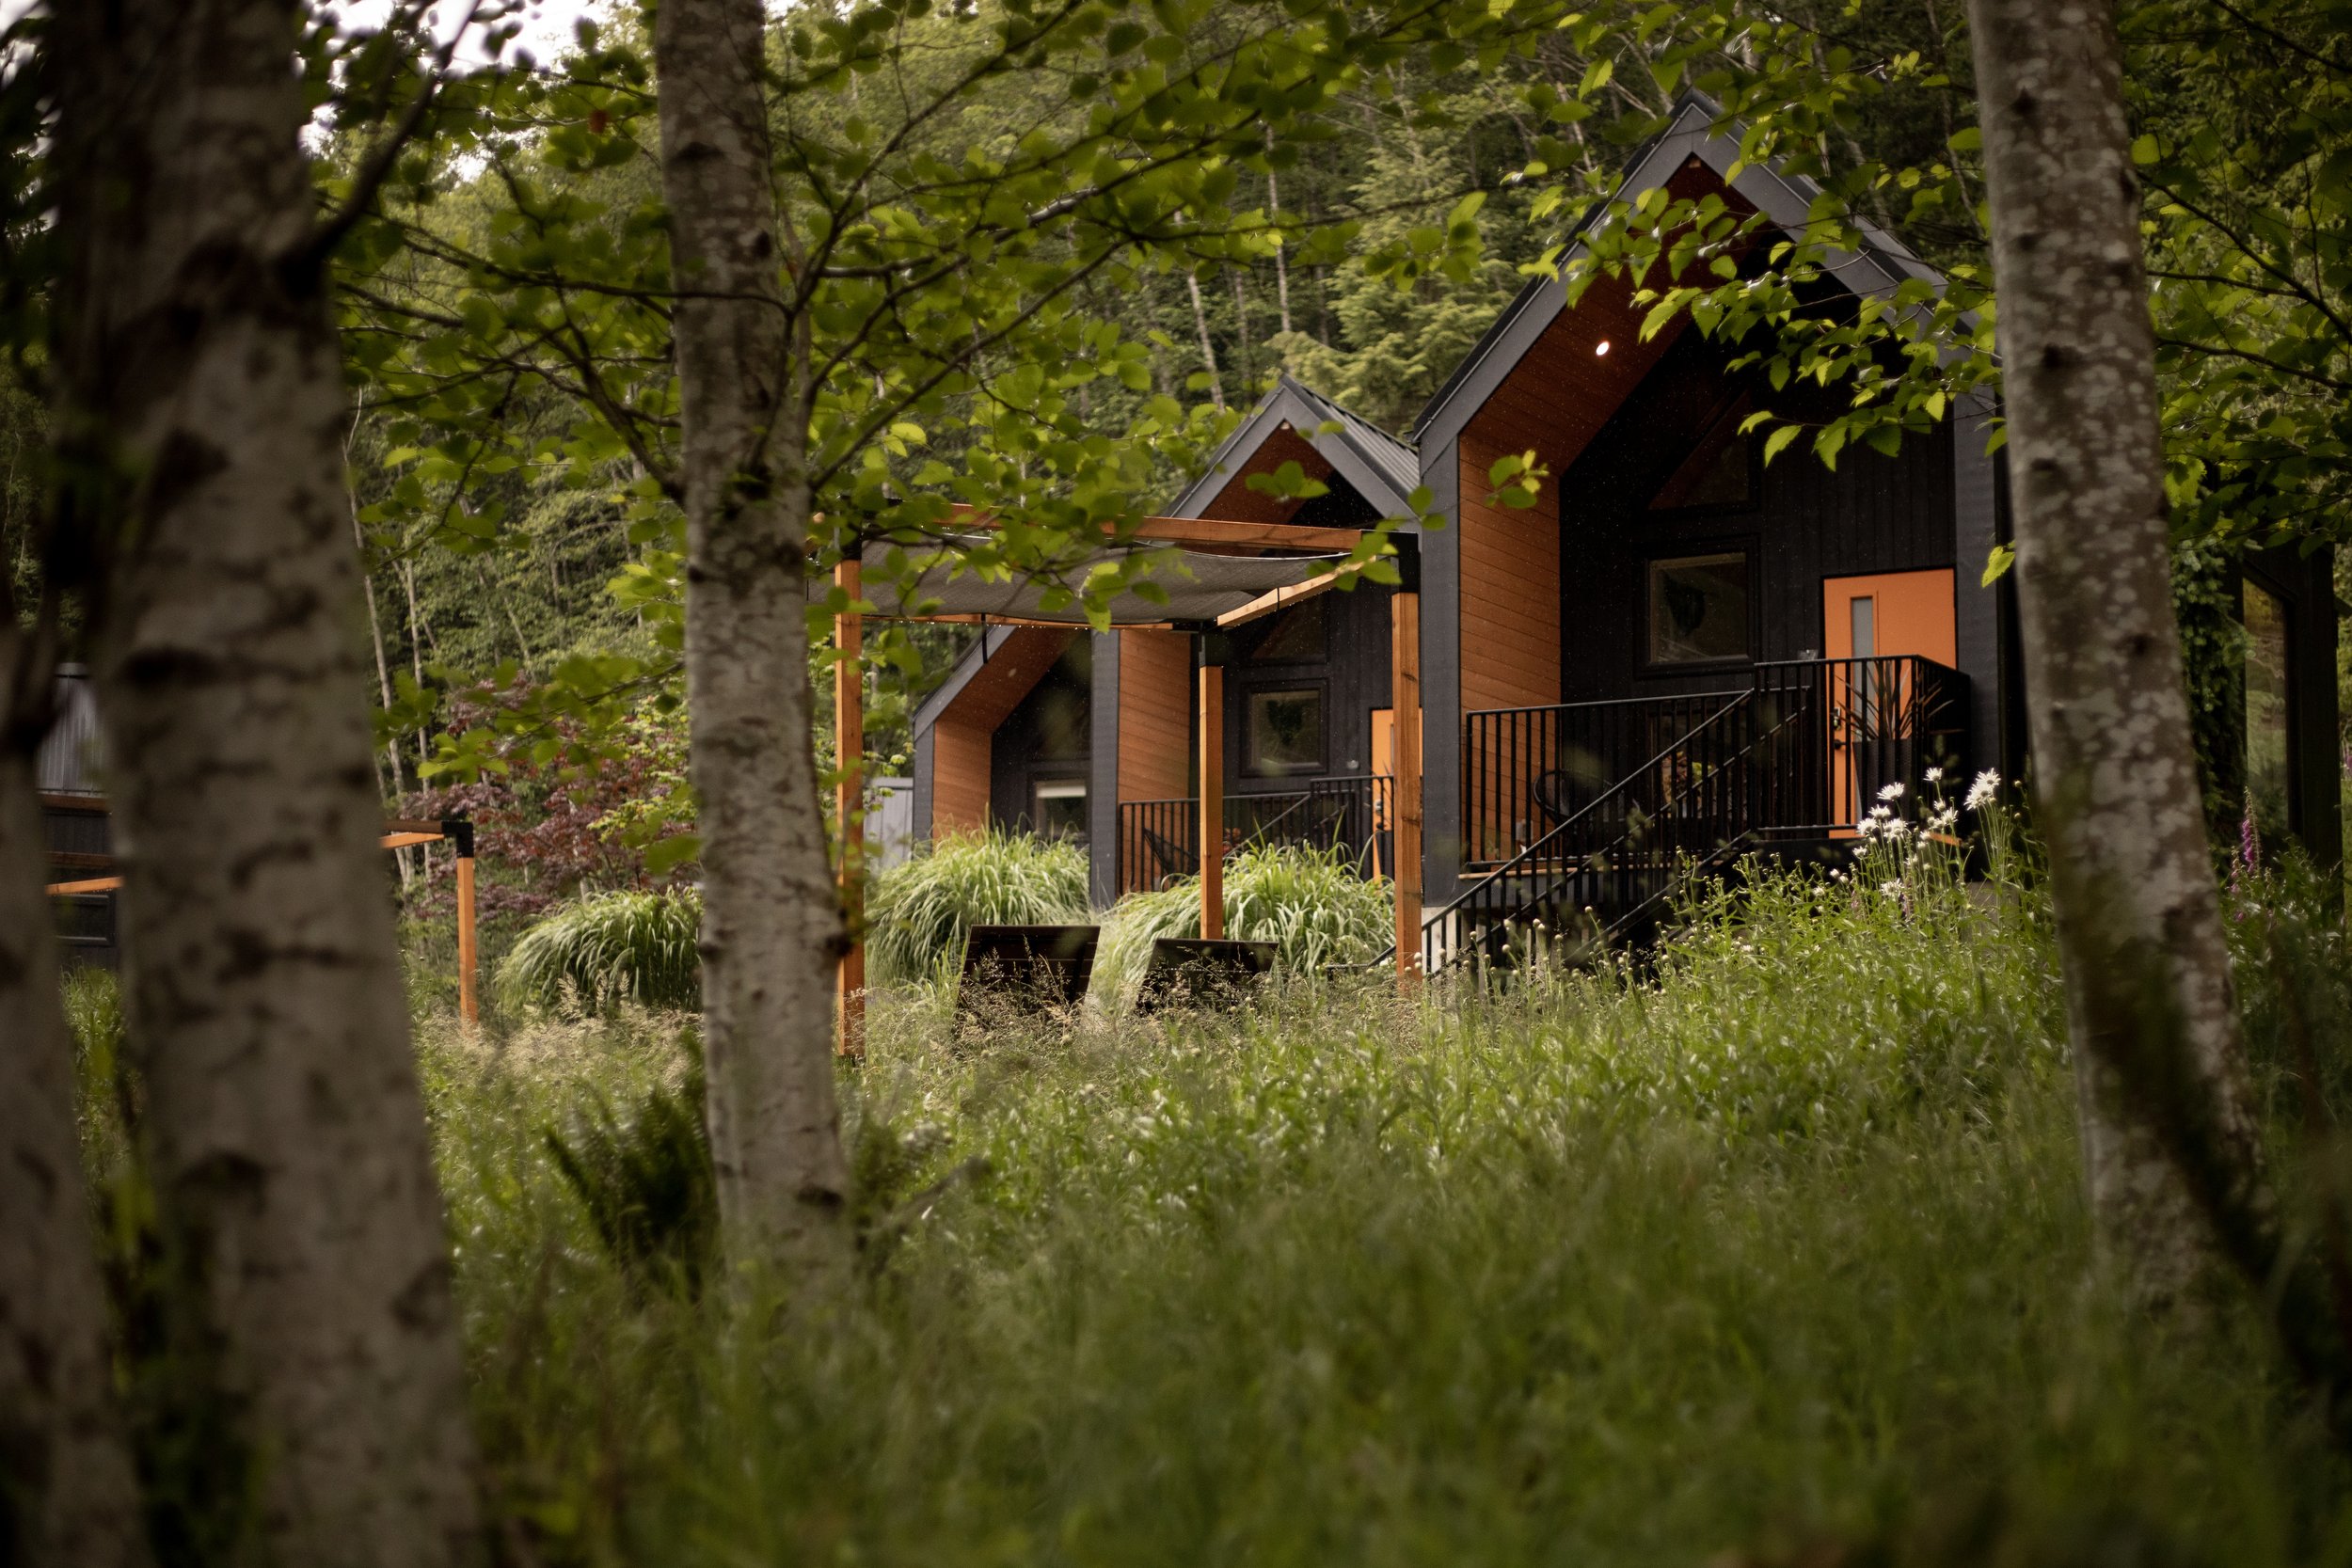 Nectar Yoga Forest View Deluxe Cottages Exterior Vancouver British Columbia 06_2023 @abbydellphotography.jpg